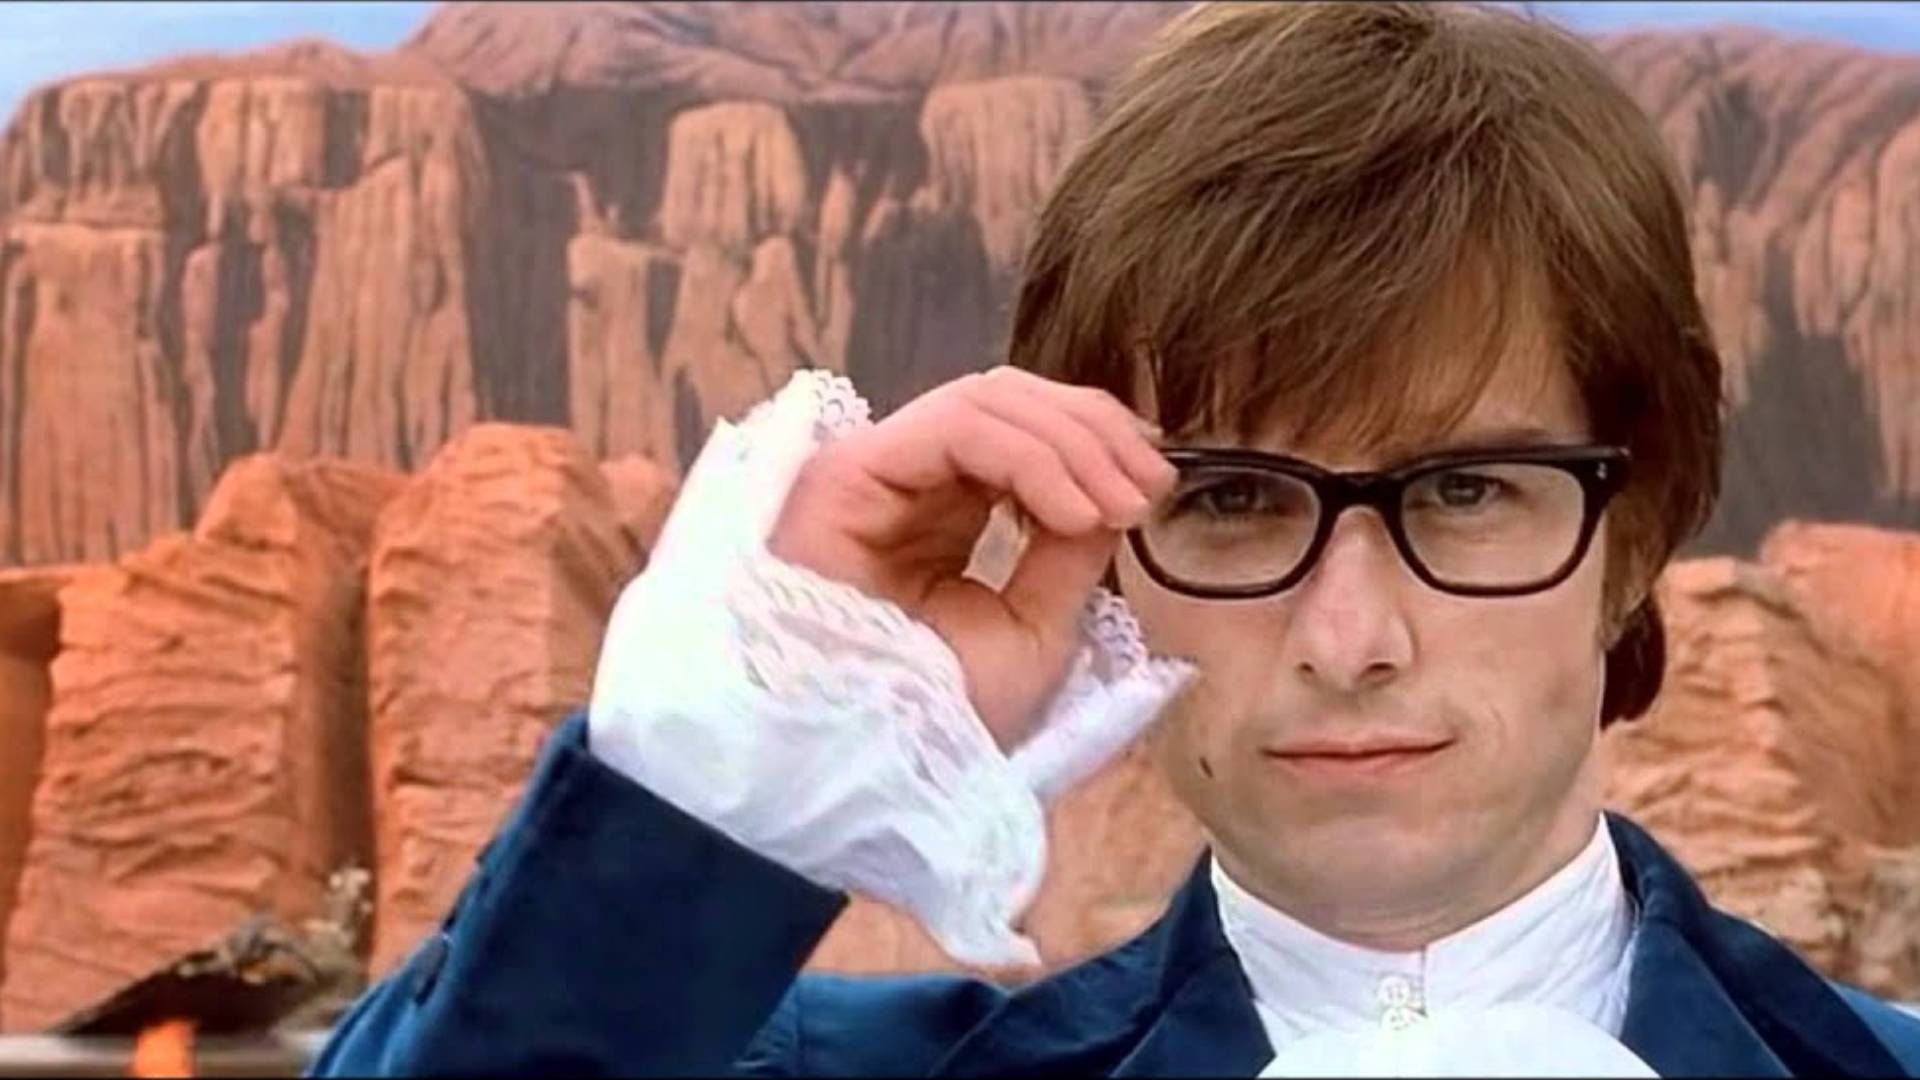 <p>                     For someone who’s had a lot of serious roles, Tom Cruise isn’t afraid of a little silliness on screen either. A great example of this is his cameo in Austin Powers in Goldmember, where he plays the British agent in a biopic of himself. His cameo in the movie-within-the-movie may only be brief, but Cruise nails his mannerisms and looks pretty spot-on in the iconic get-up. Skydiving into a moving car is a pretty Cruise-level move too, making this parody even more perfect. "Yeah, baby," indeed.                   </p>